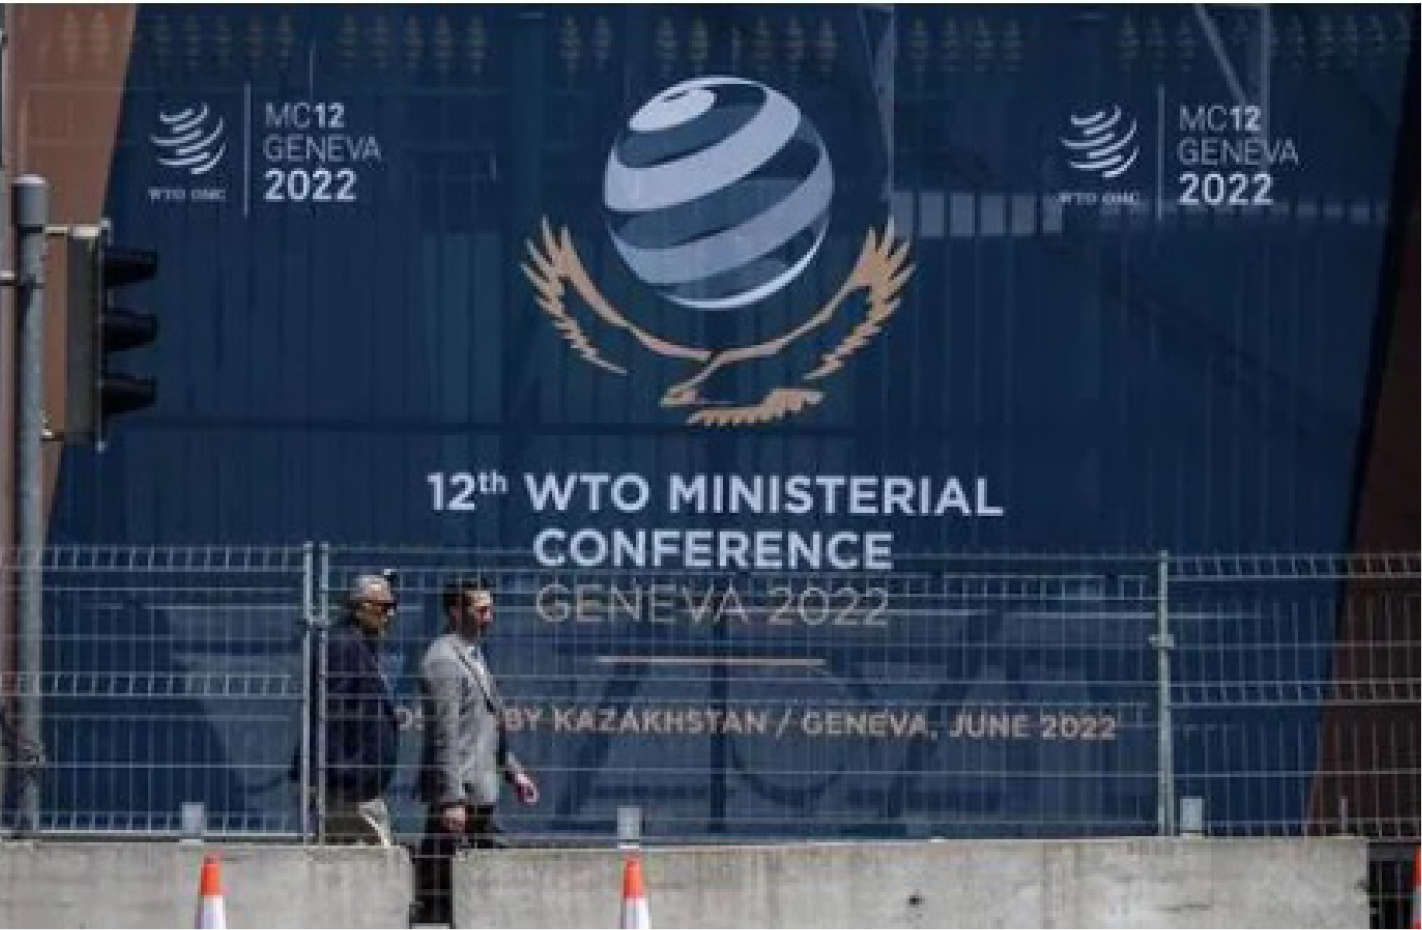 INDIA EXPECTS 12TH WTO MINISTERIAL MEET TO OFFER SOLUTIONS TO KEY ISSUES